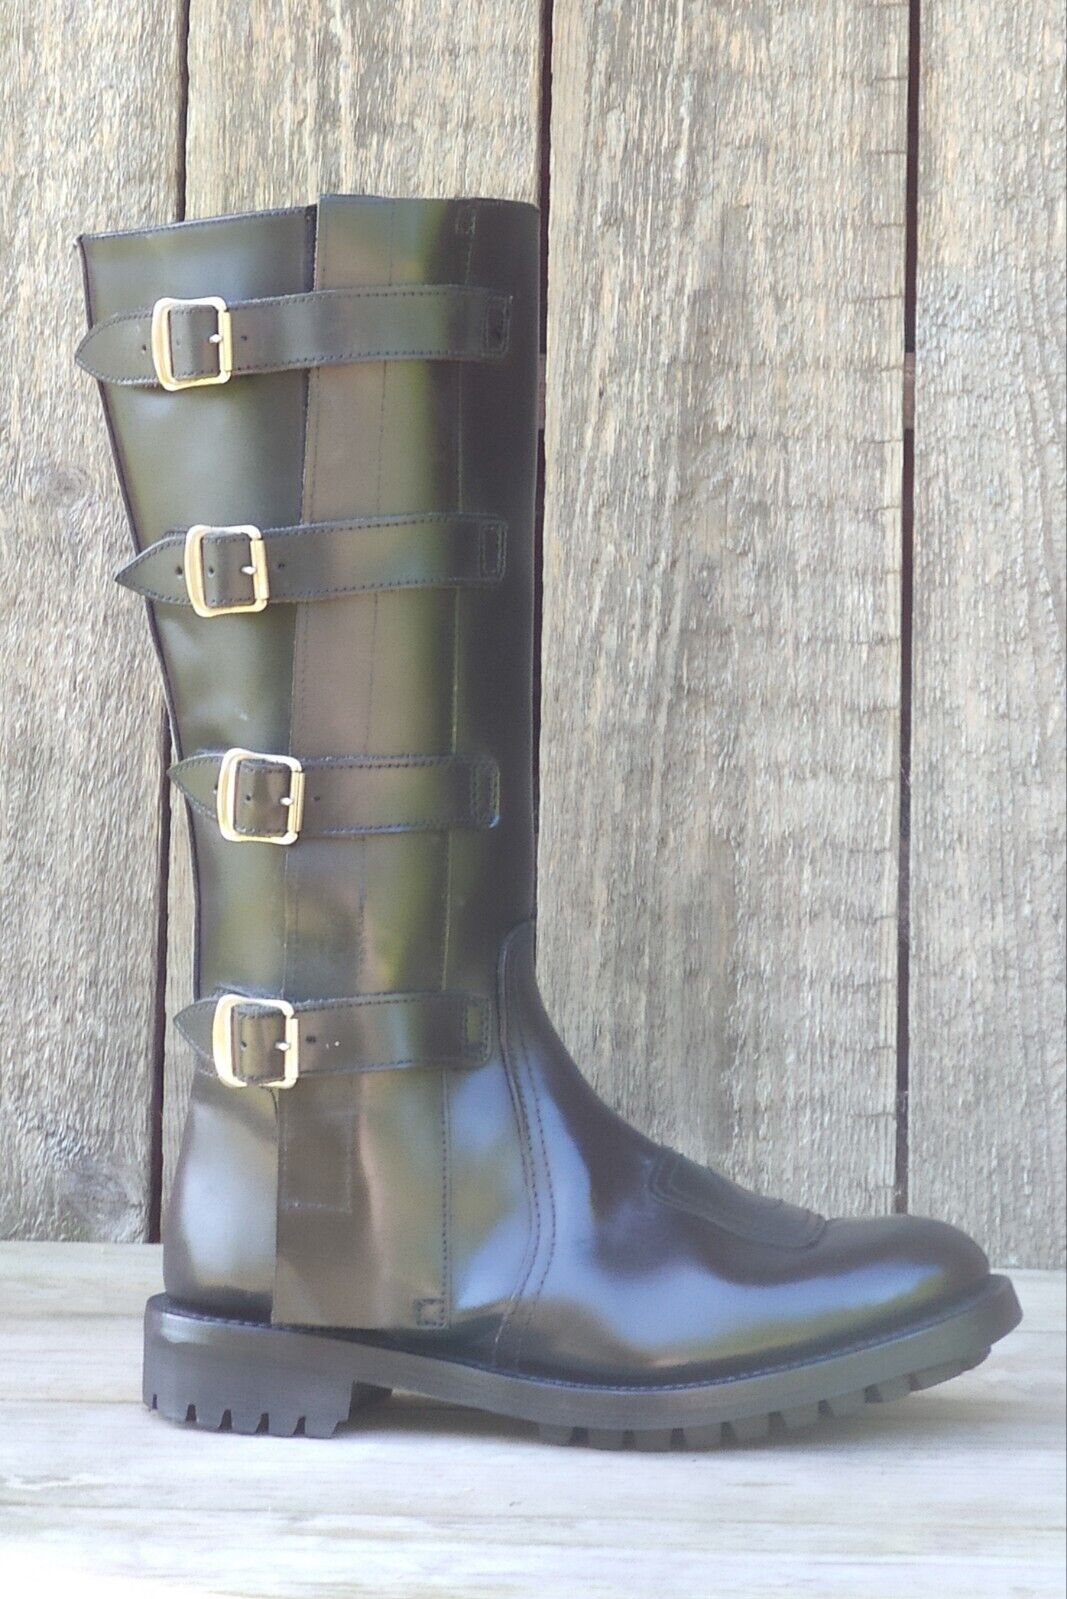 Image of Vintage Police/Classic Black Leather Motorcycle Boots with Side Straps - Size 7